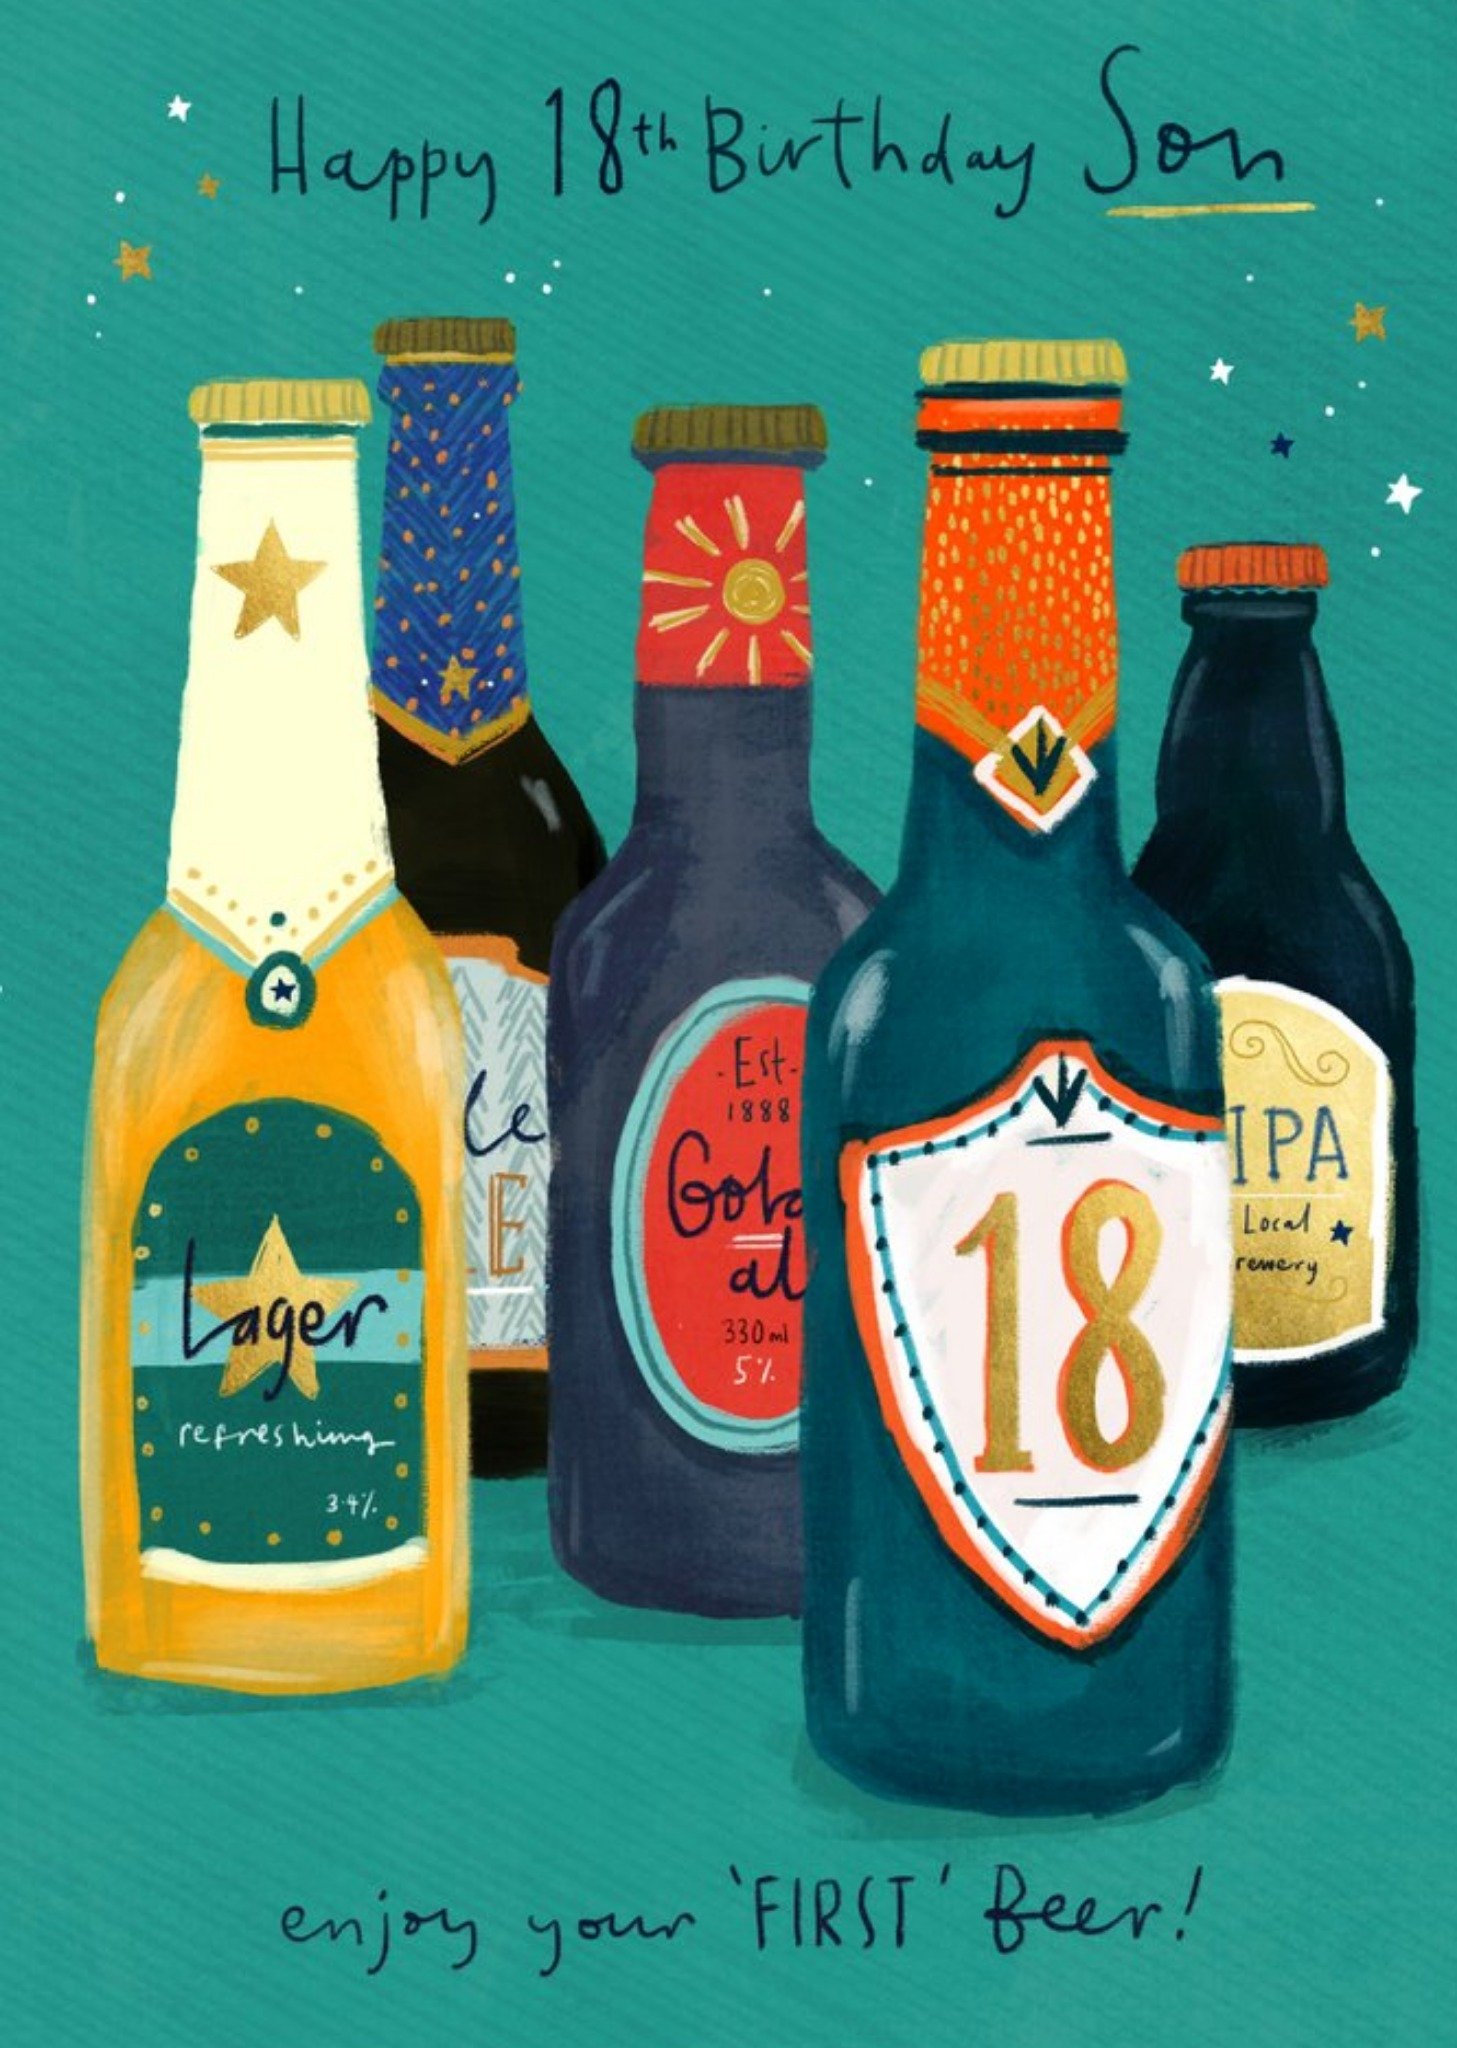 Moonpig Illustration Bottles Happy 18th Birthday Son Enjoy Your First Beer, Large Card